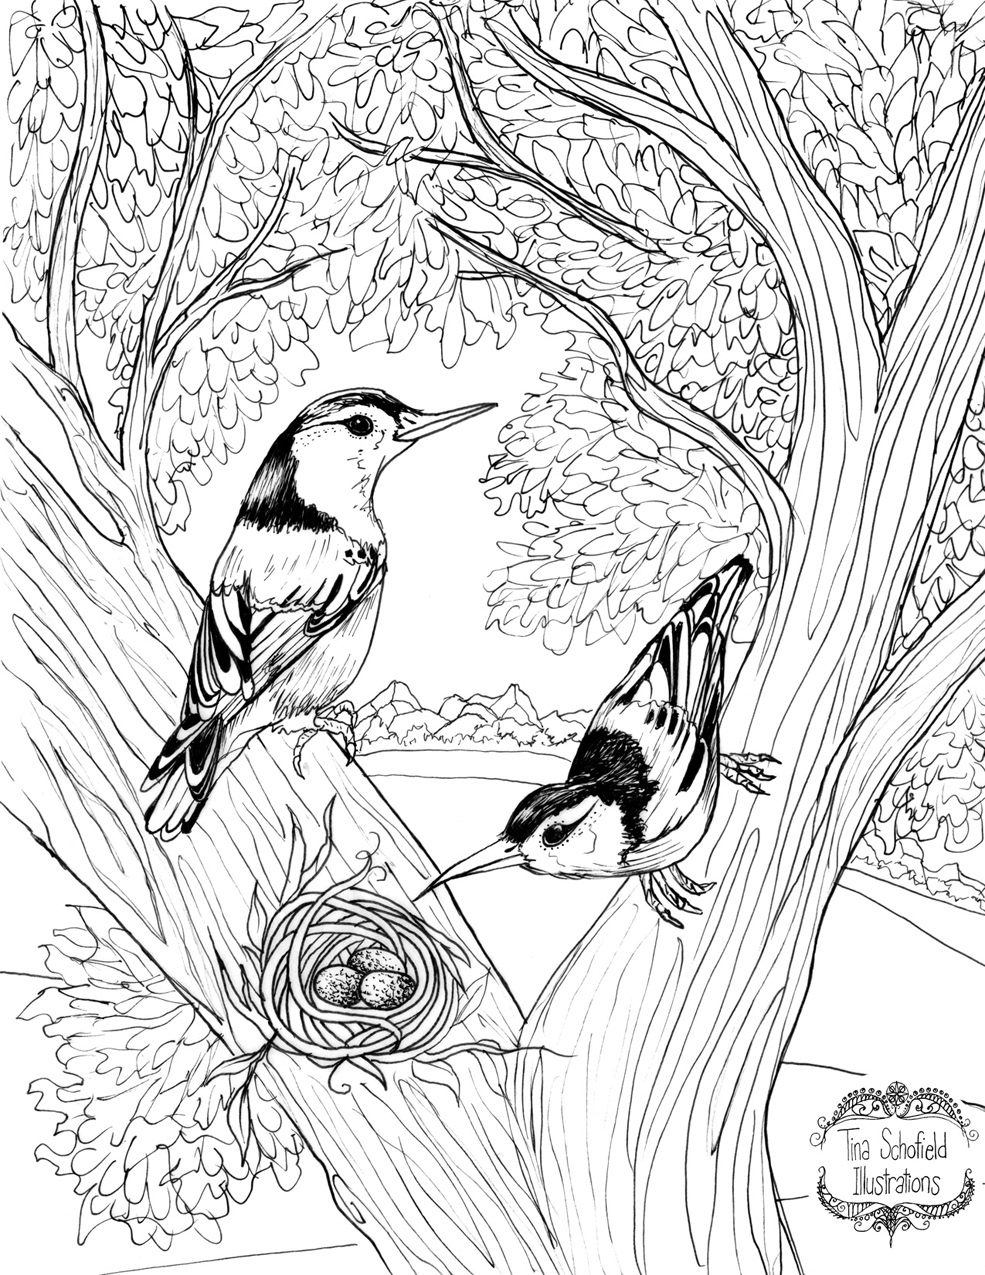 white-breasted finches american robins birds coloring book black and white ink drawings animals wildlife activism Human rights